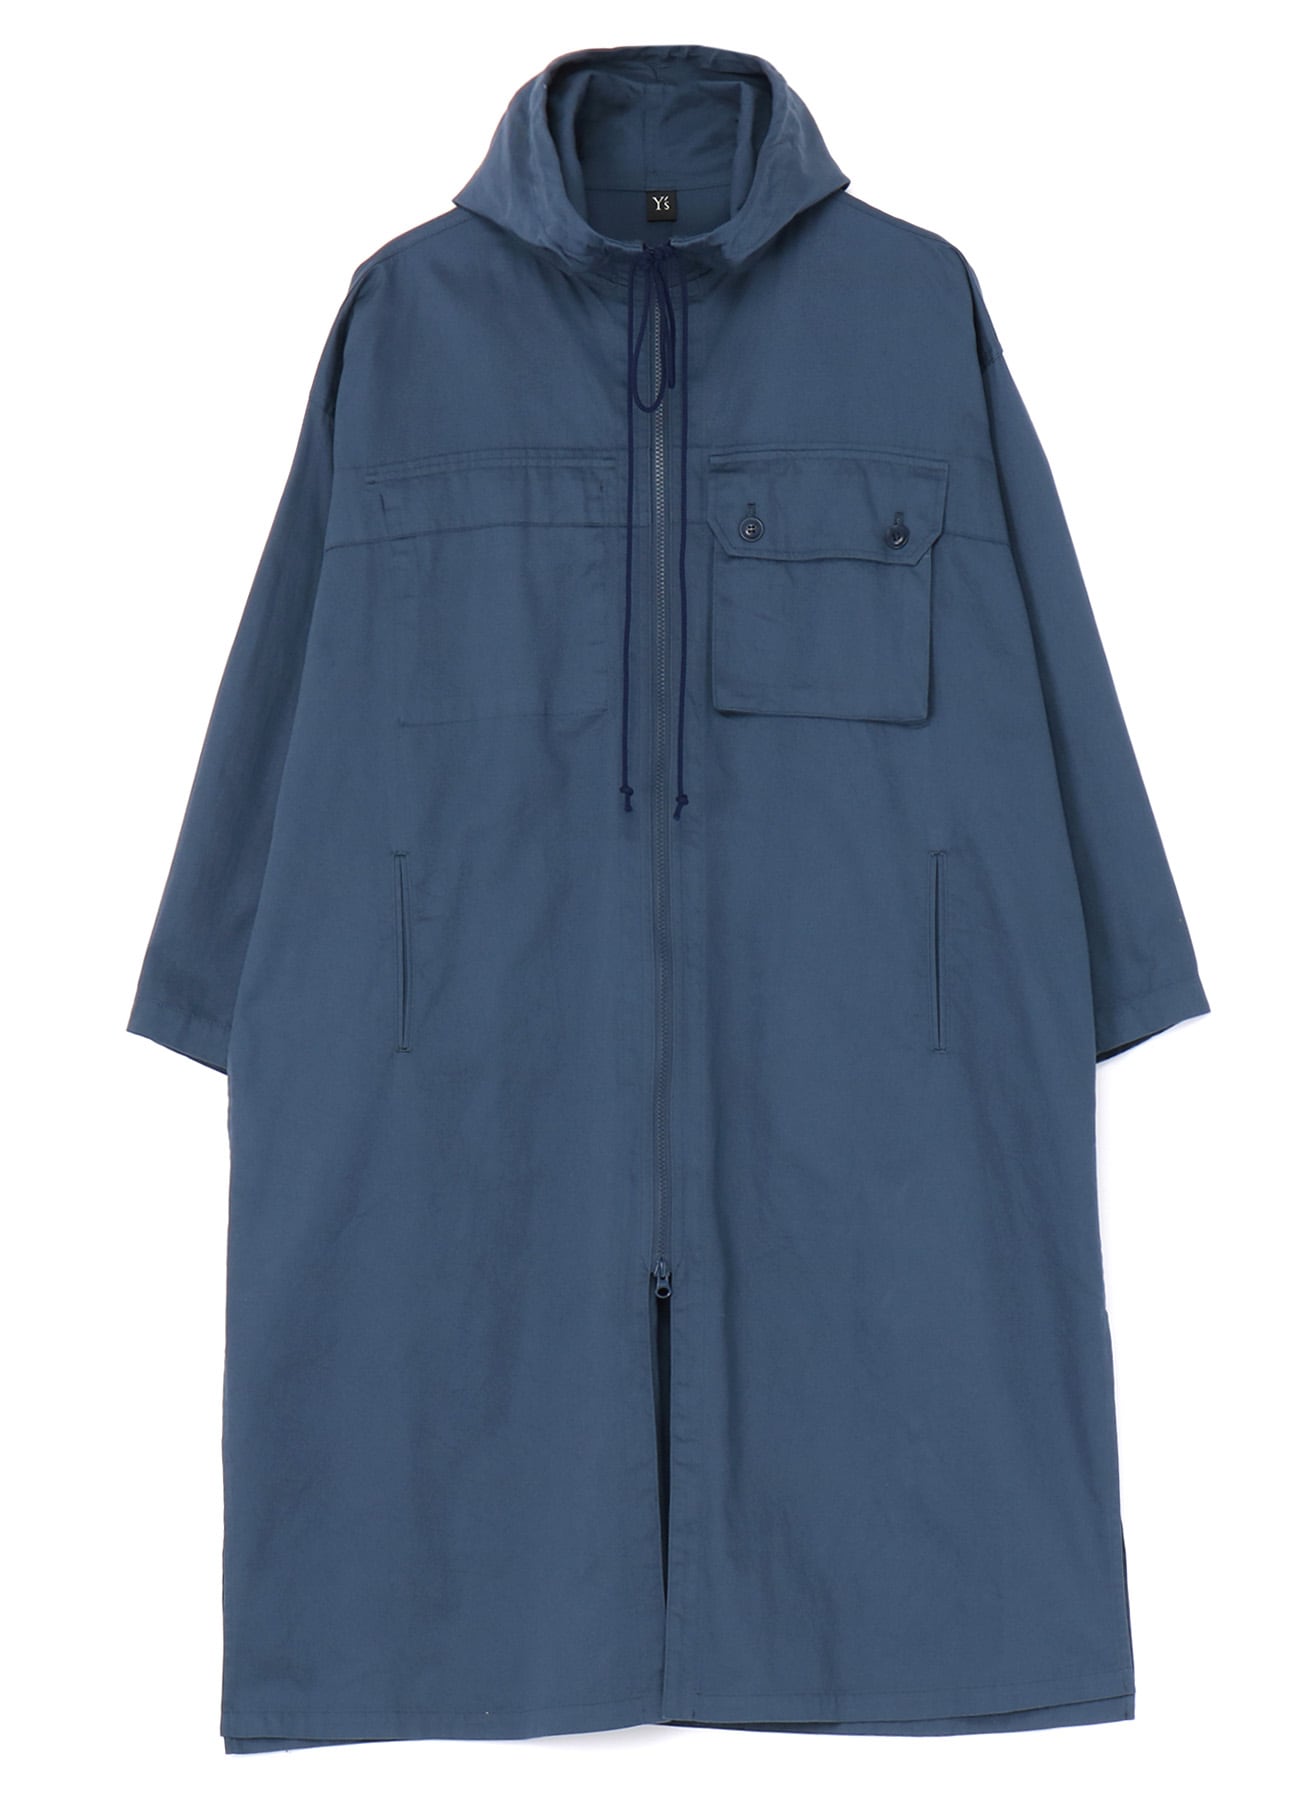 Y's BORN PRODUCT] COTTON TWILL HOODED COAT(XS Blue Grey): Y's｜THE 